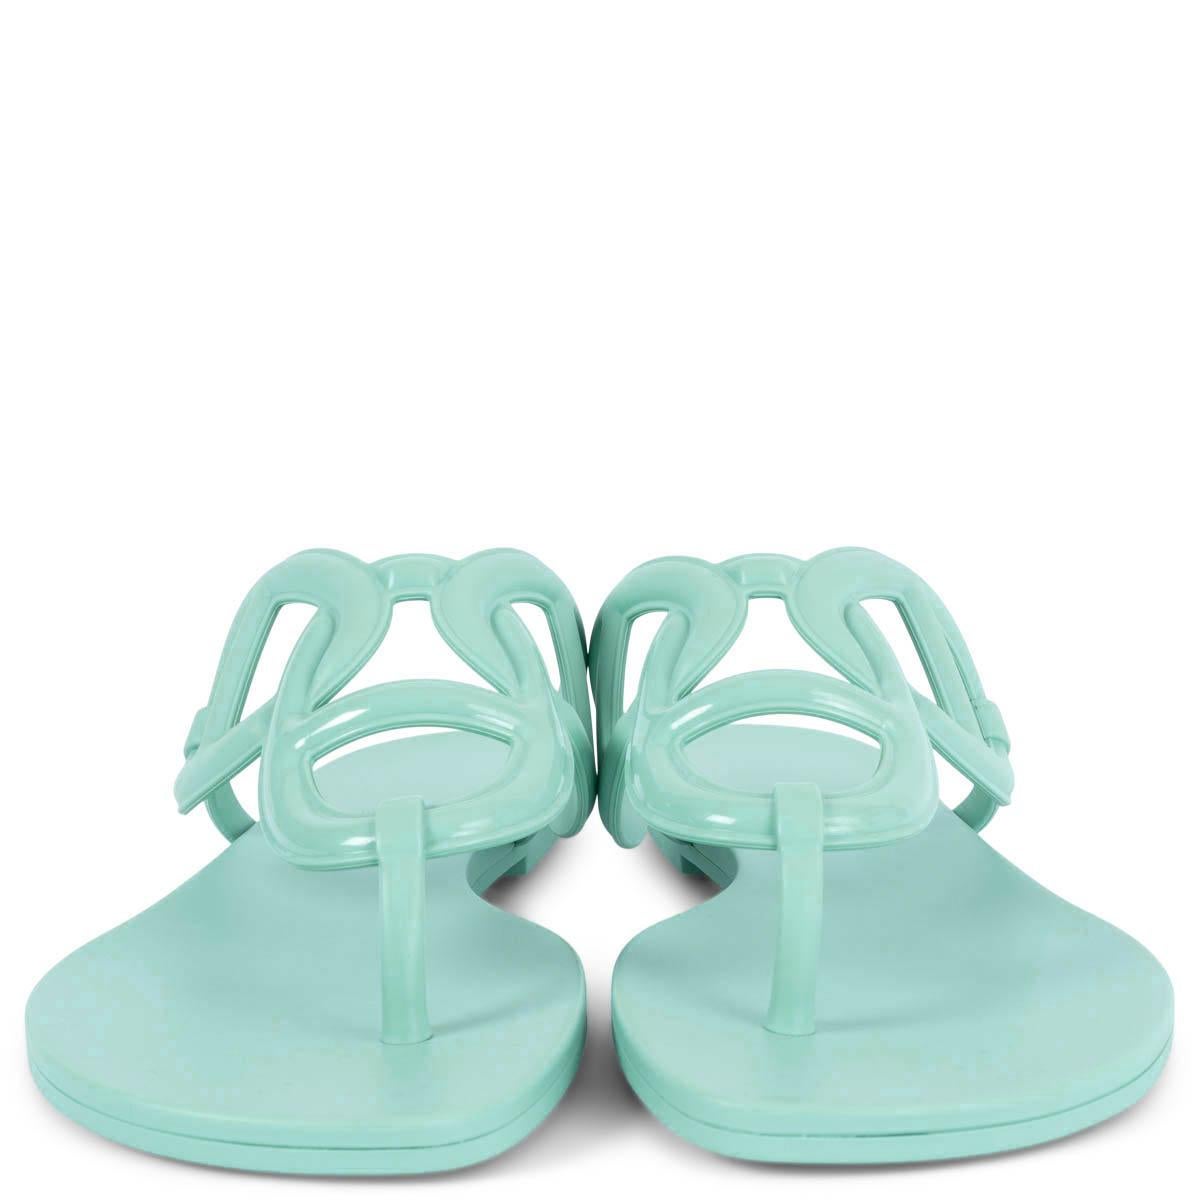 100% authentic Hermès Egerie thong sandals in Vert Embrum (mint green) waterproof TPU with Chaine d'Ancre motif. Brand new. 

Measurements
Model	H221001Z 08380
Imprinted Size	38
Shoe Size	38
Inside Sole	24.5cm (9.6in)
Width	8cm (3.1in)
Heel	1.5cm